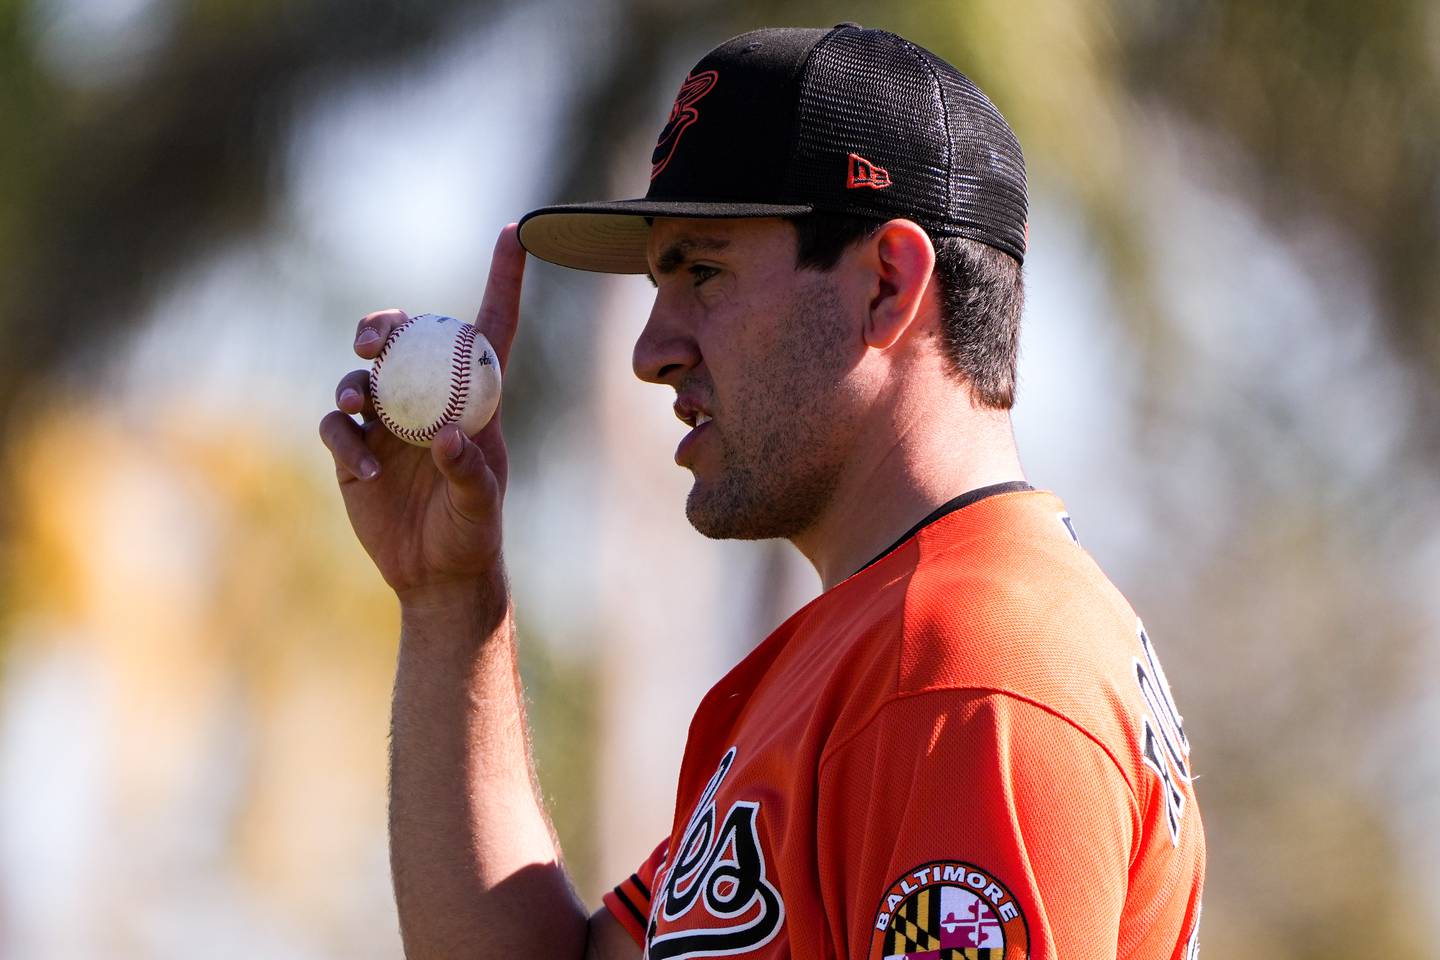 Orioles pitcher Grayson Rodriguez (85) prepares a pitch during practice at Ed Smith Stadium in Sarasota on 2/22/23. The Baltimore Orioles’ Spring Training session runs from mid-February through the end of March.